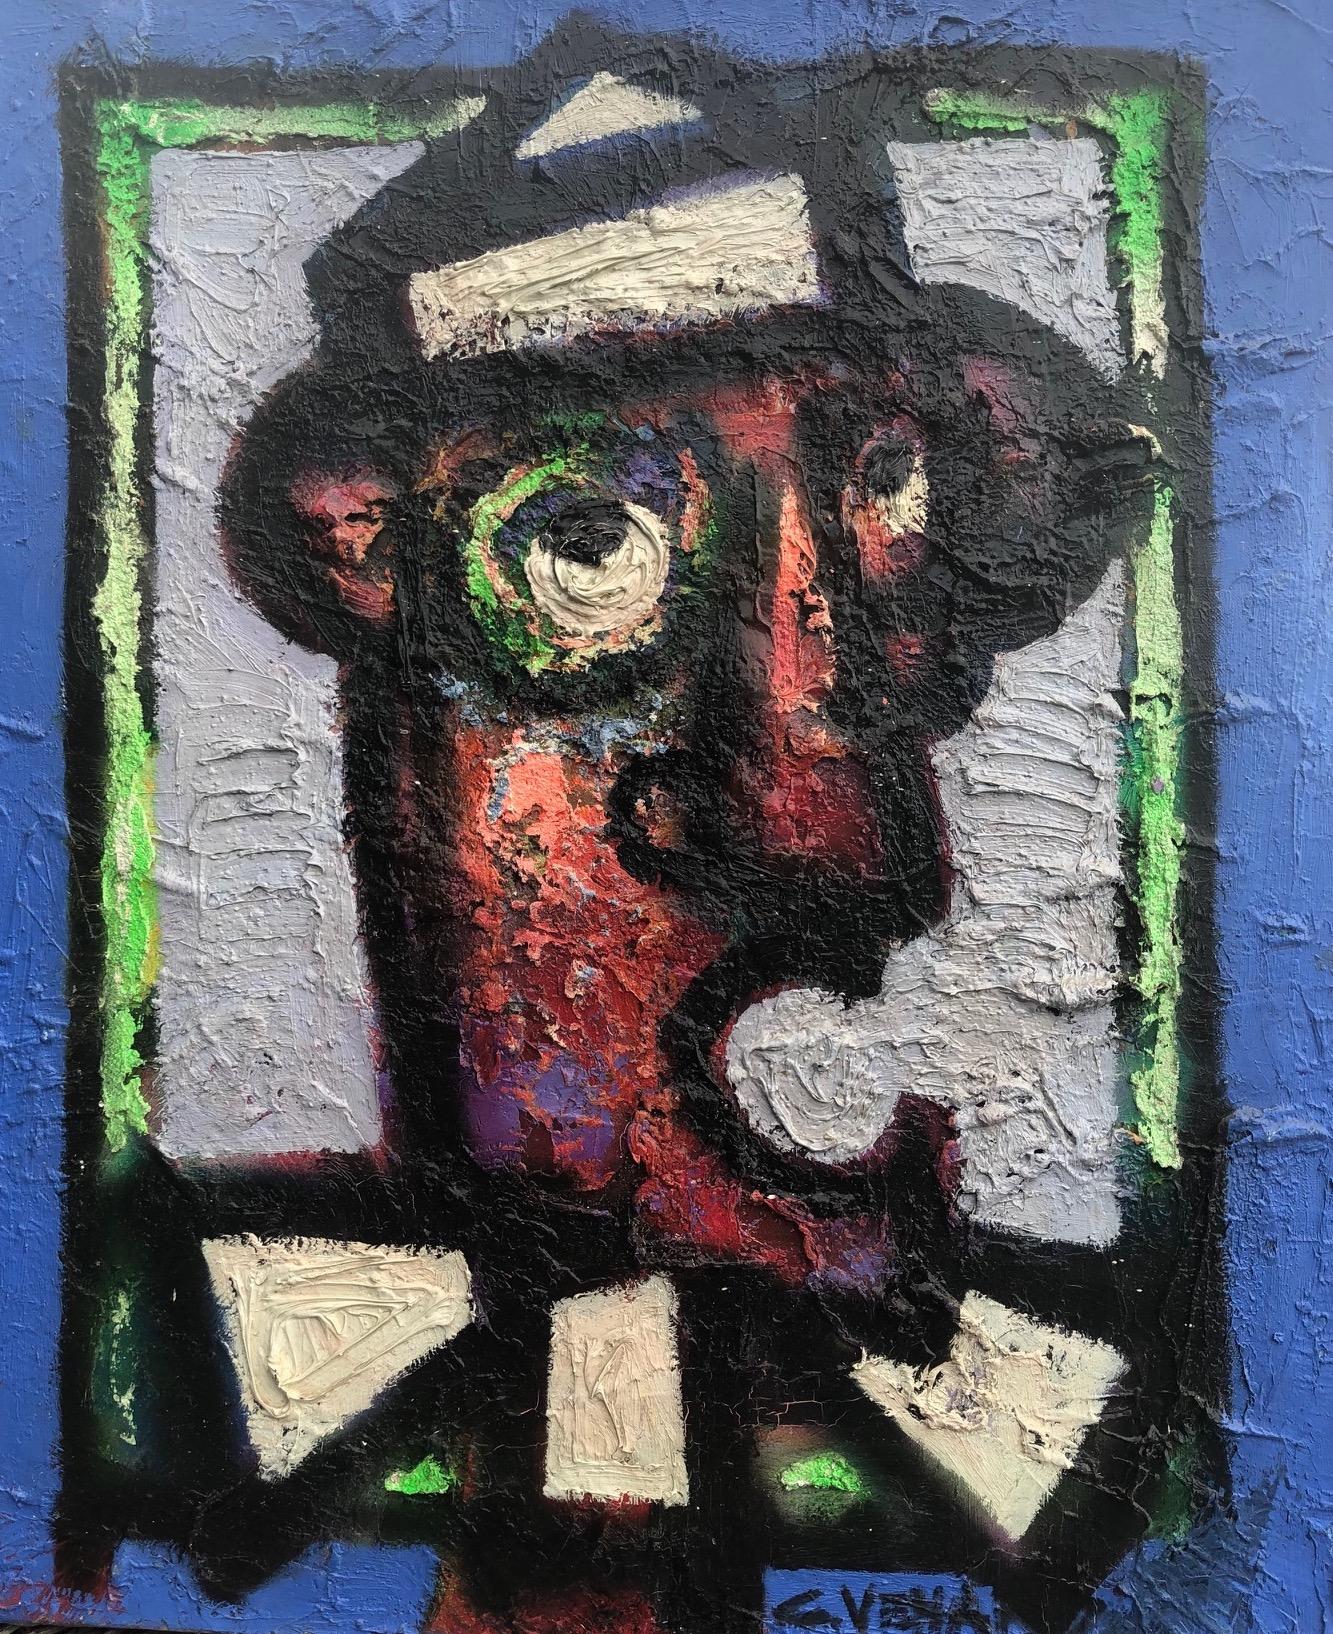 Post Cubist Abstract 20th Century Colourful Painting 'Le Clown' by Claude Venard